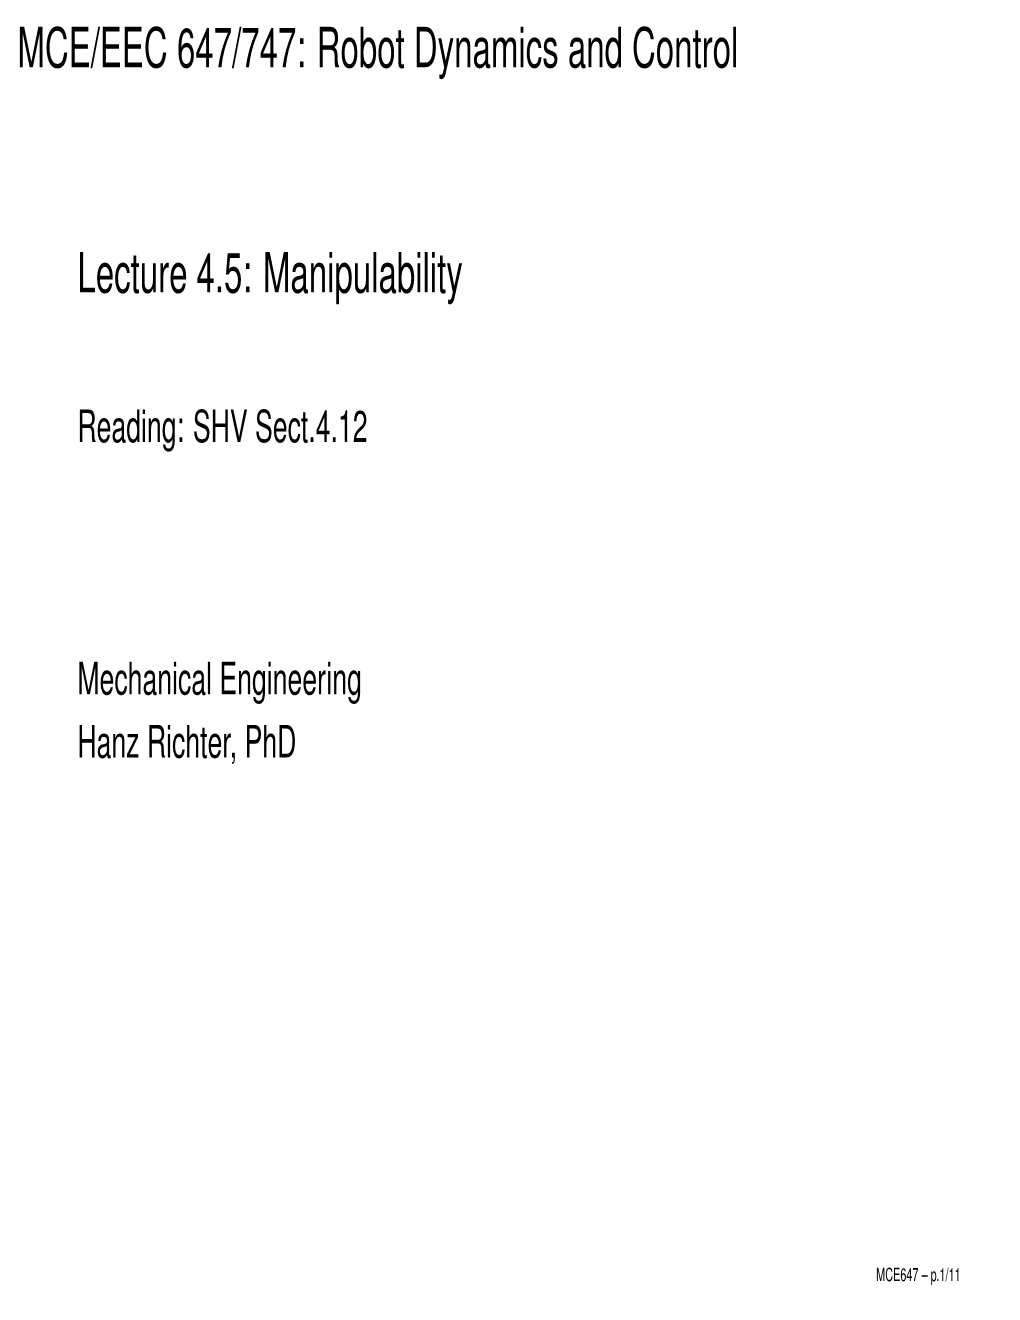 Robot Dynamics and Control Lecture 4.5: Manipulability